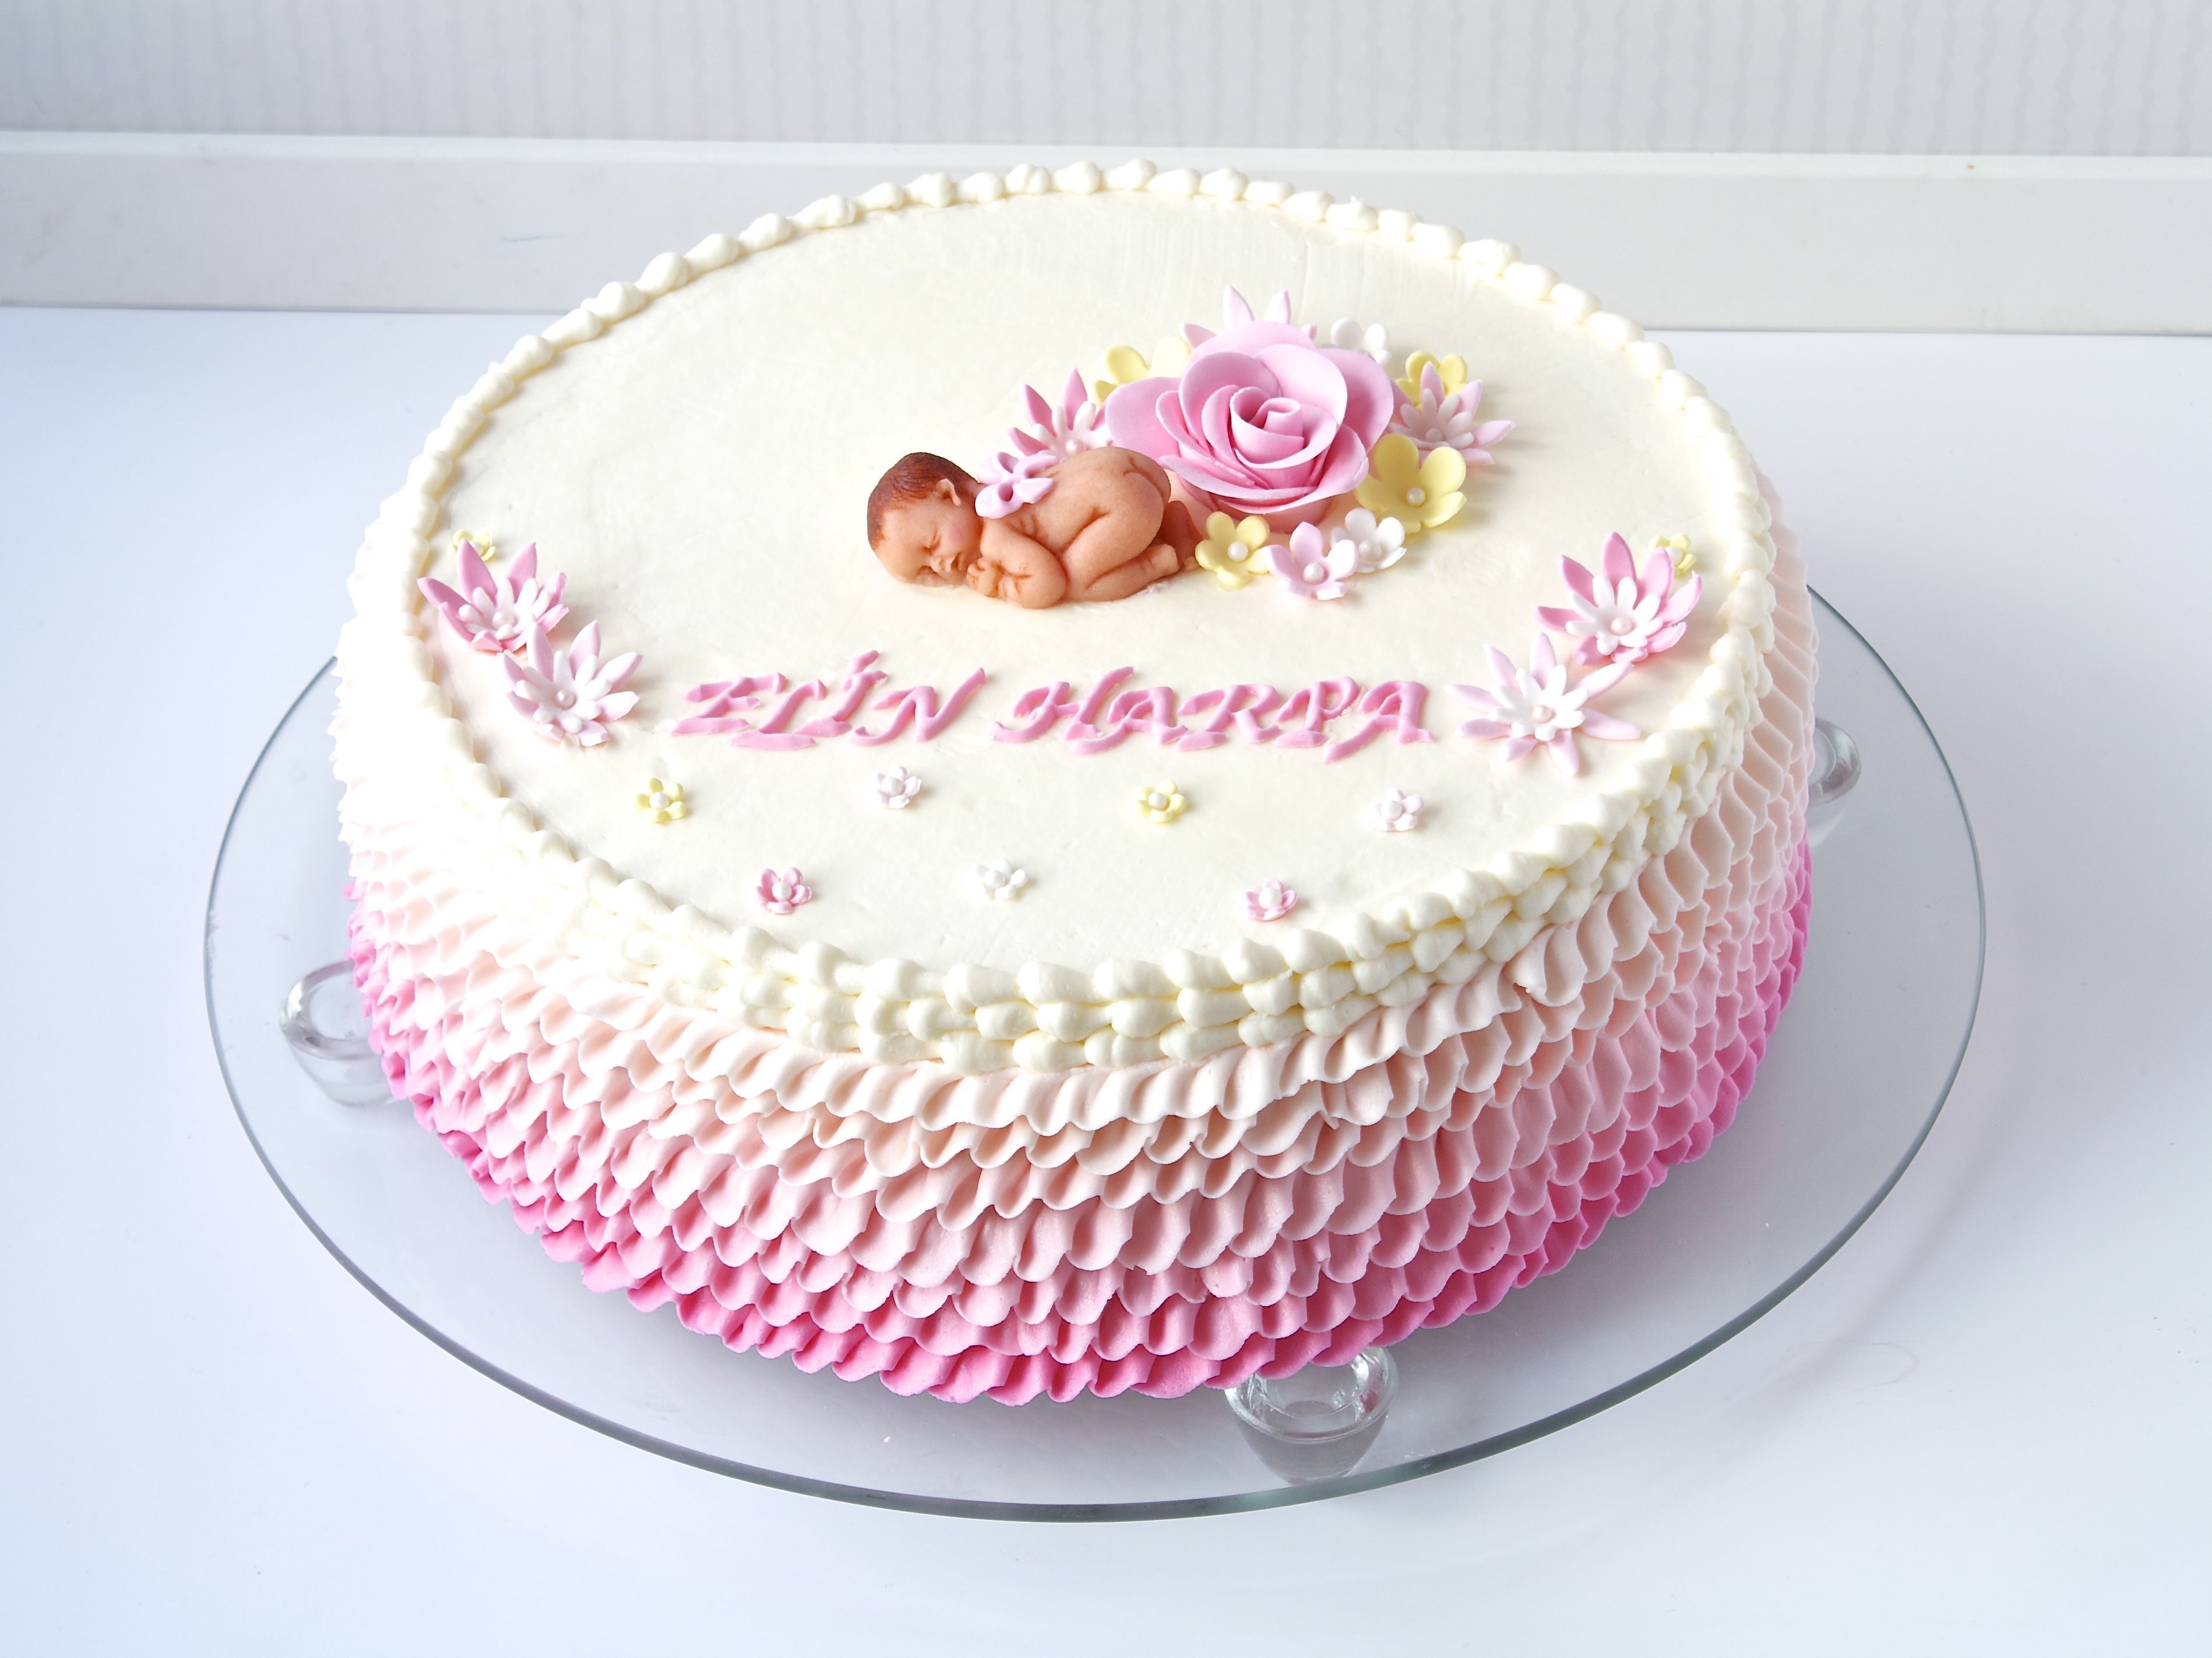 frills in white and different shades of pink, made from frosting, decorating a cake, topped with a tiny, realistic baby figurine, and flowers made from fondant, baby shower cakes for girls